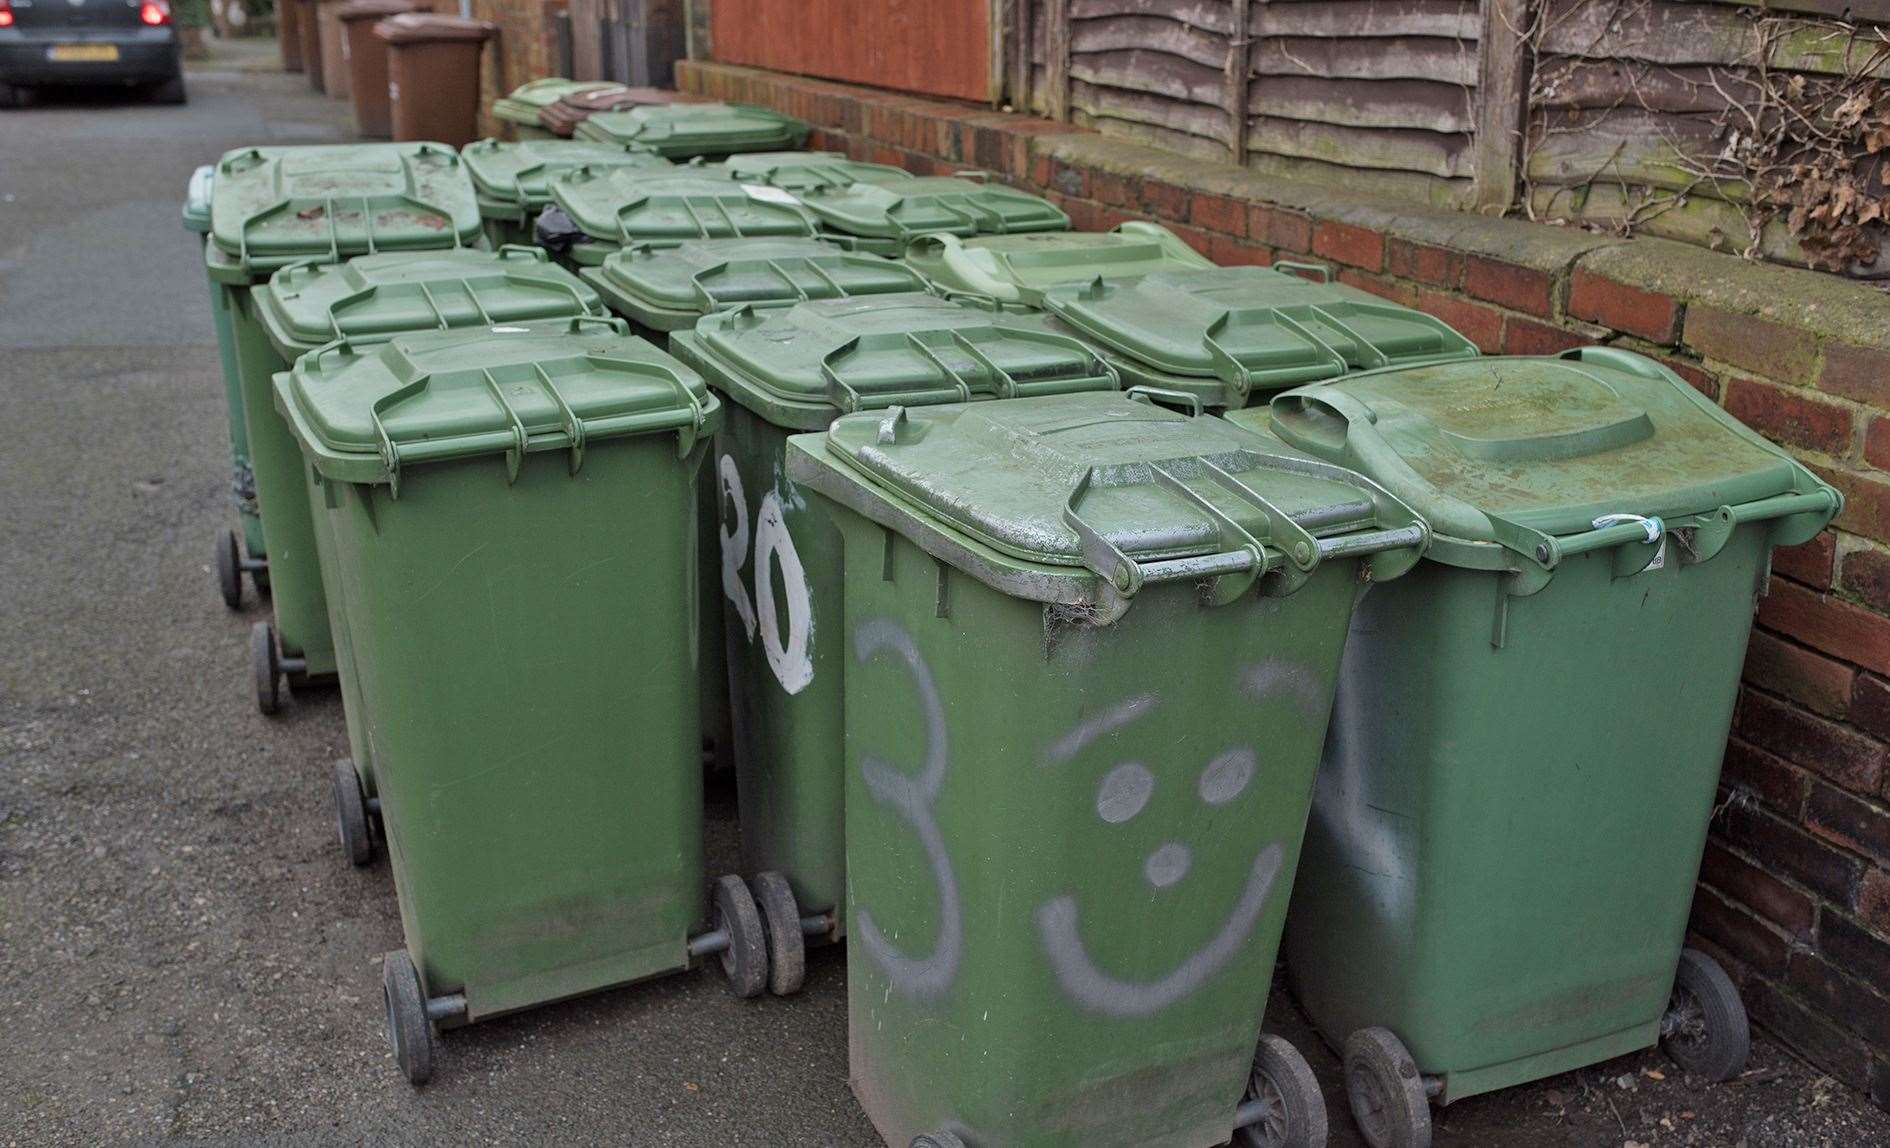 Councillors heard proposals to reduce the size of green bins.